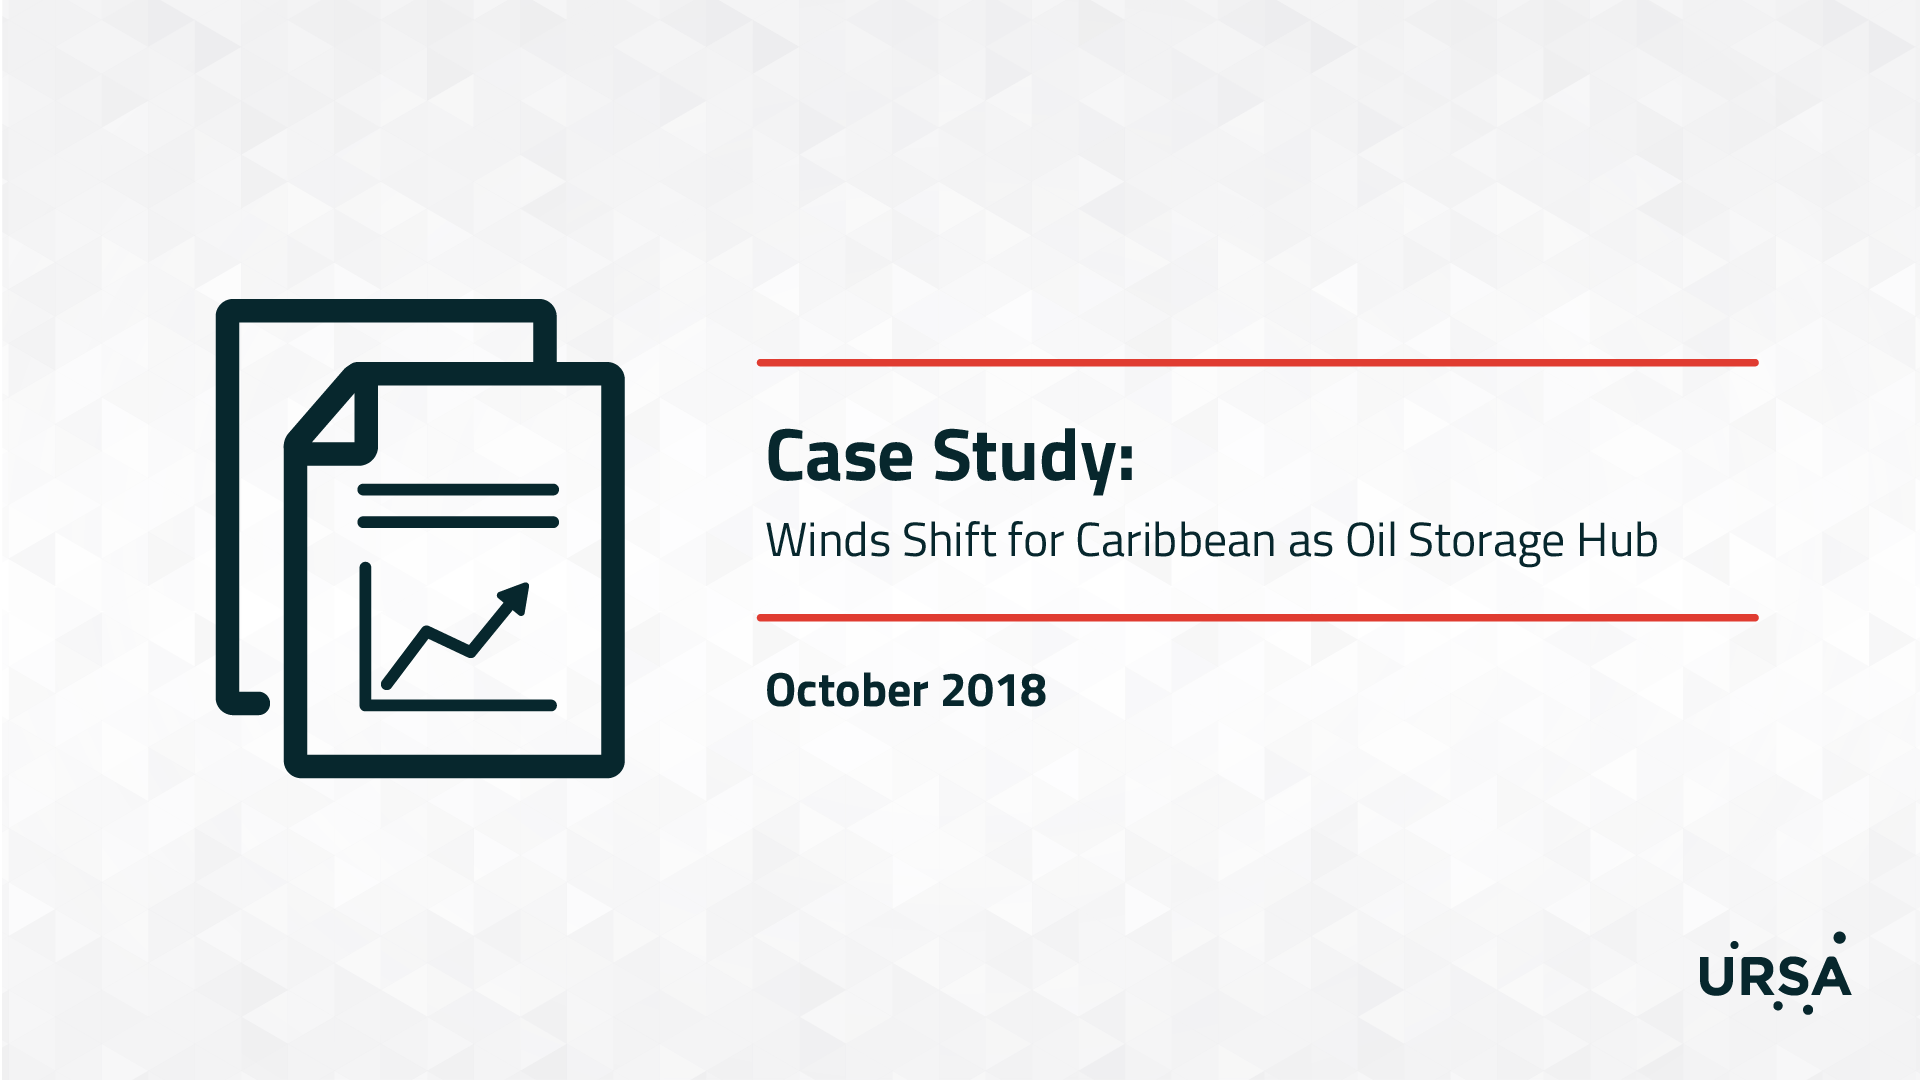 1018 - Winds Shift for Carribbean as Oil Storage Hub